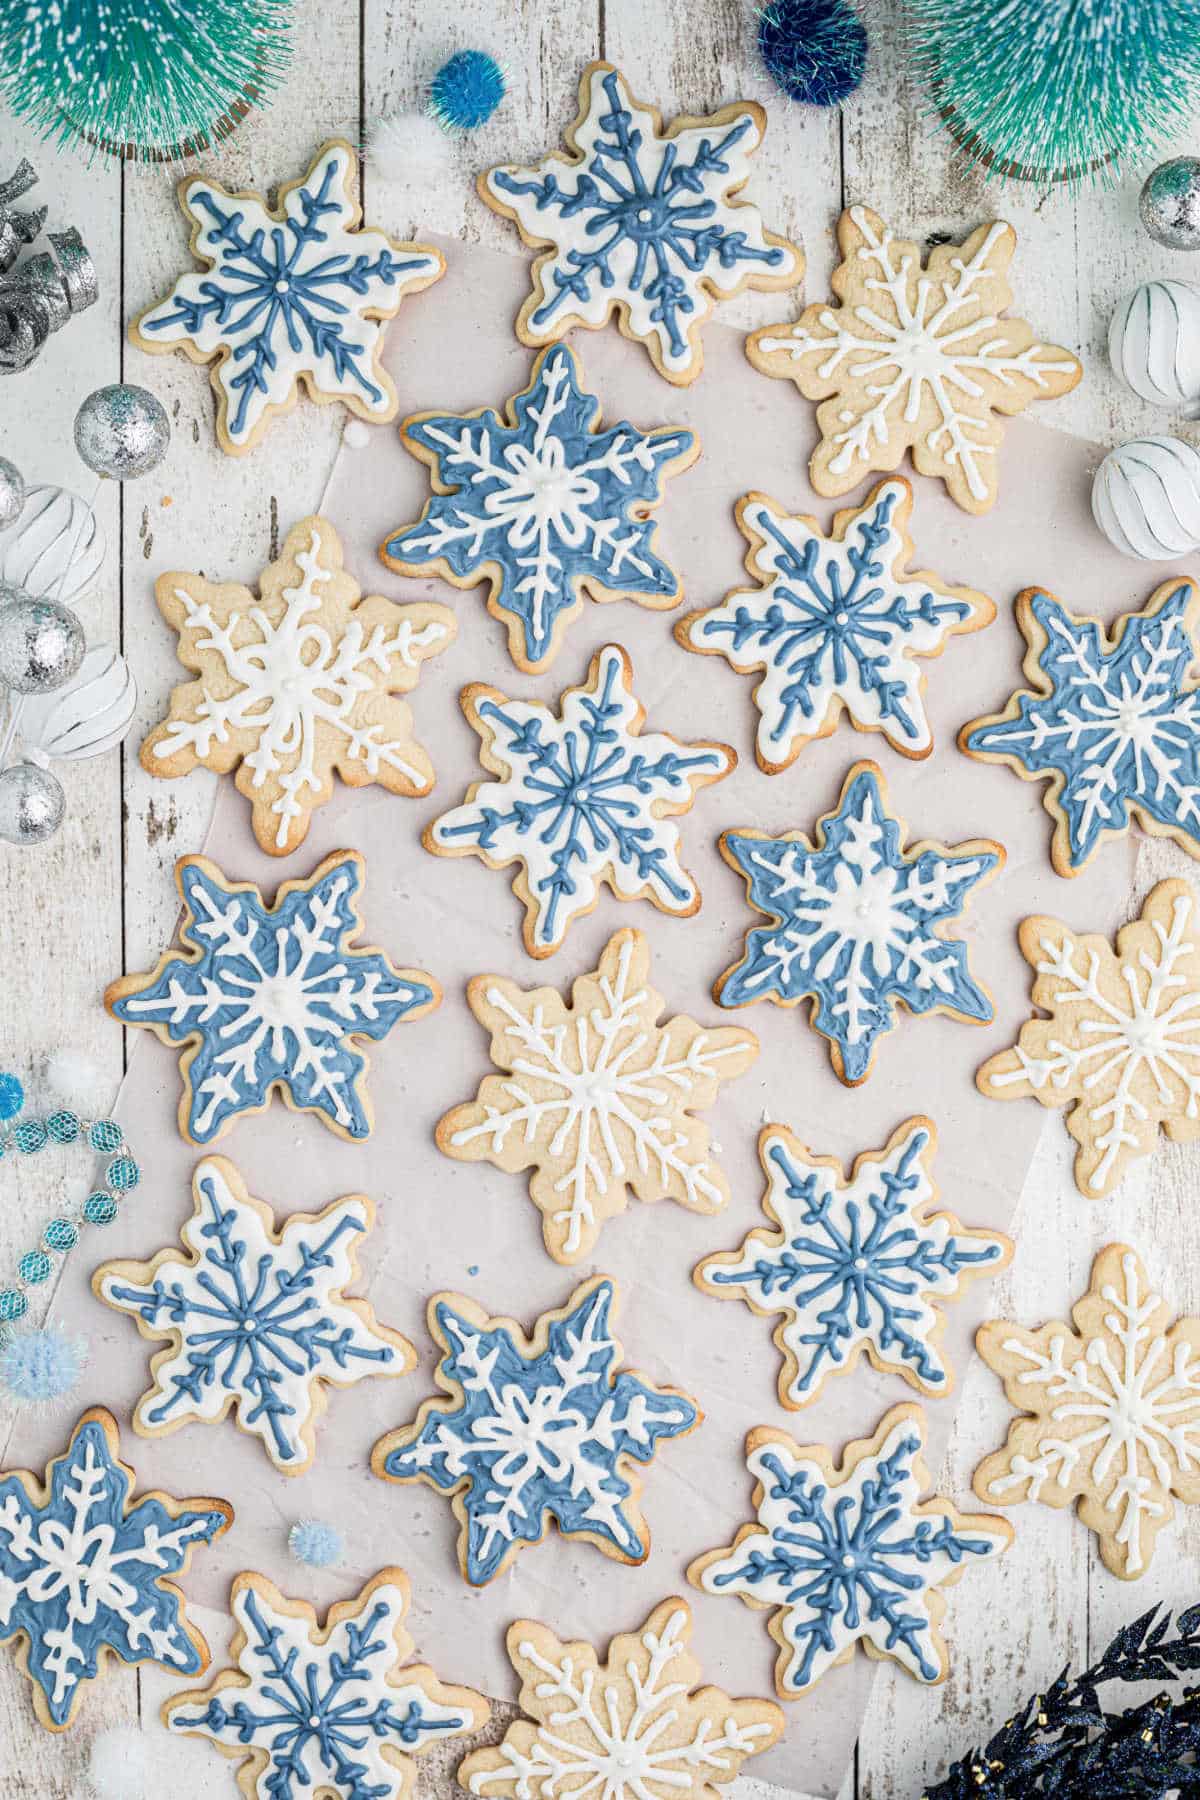 Overhead shot of a lot of snowflake cookies in white and blue.